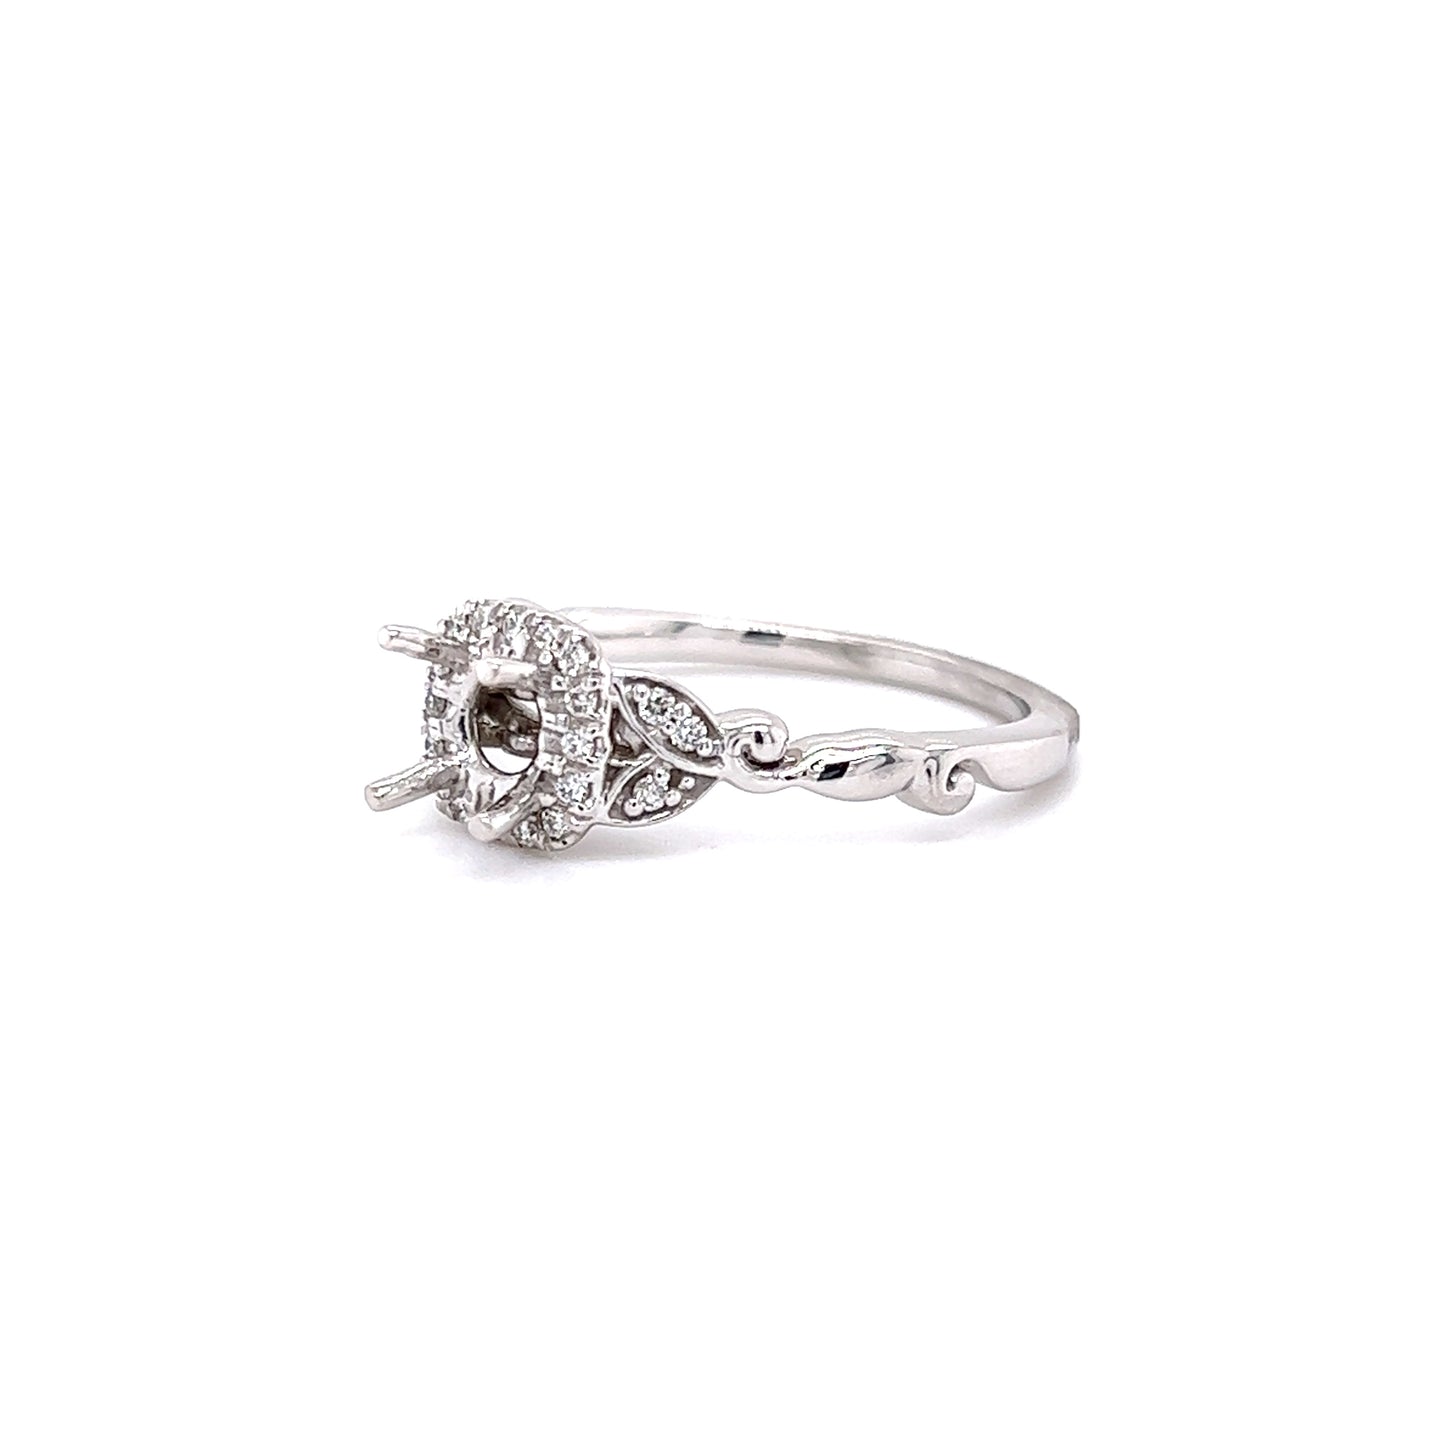 Willow Ring Setting with Diamond Halo in 14K White Gold RightSide View